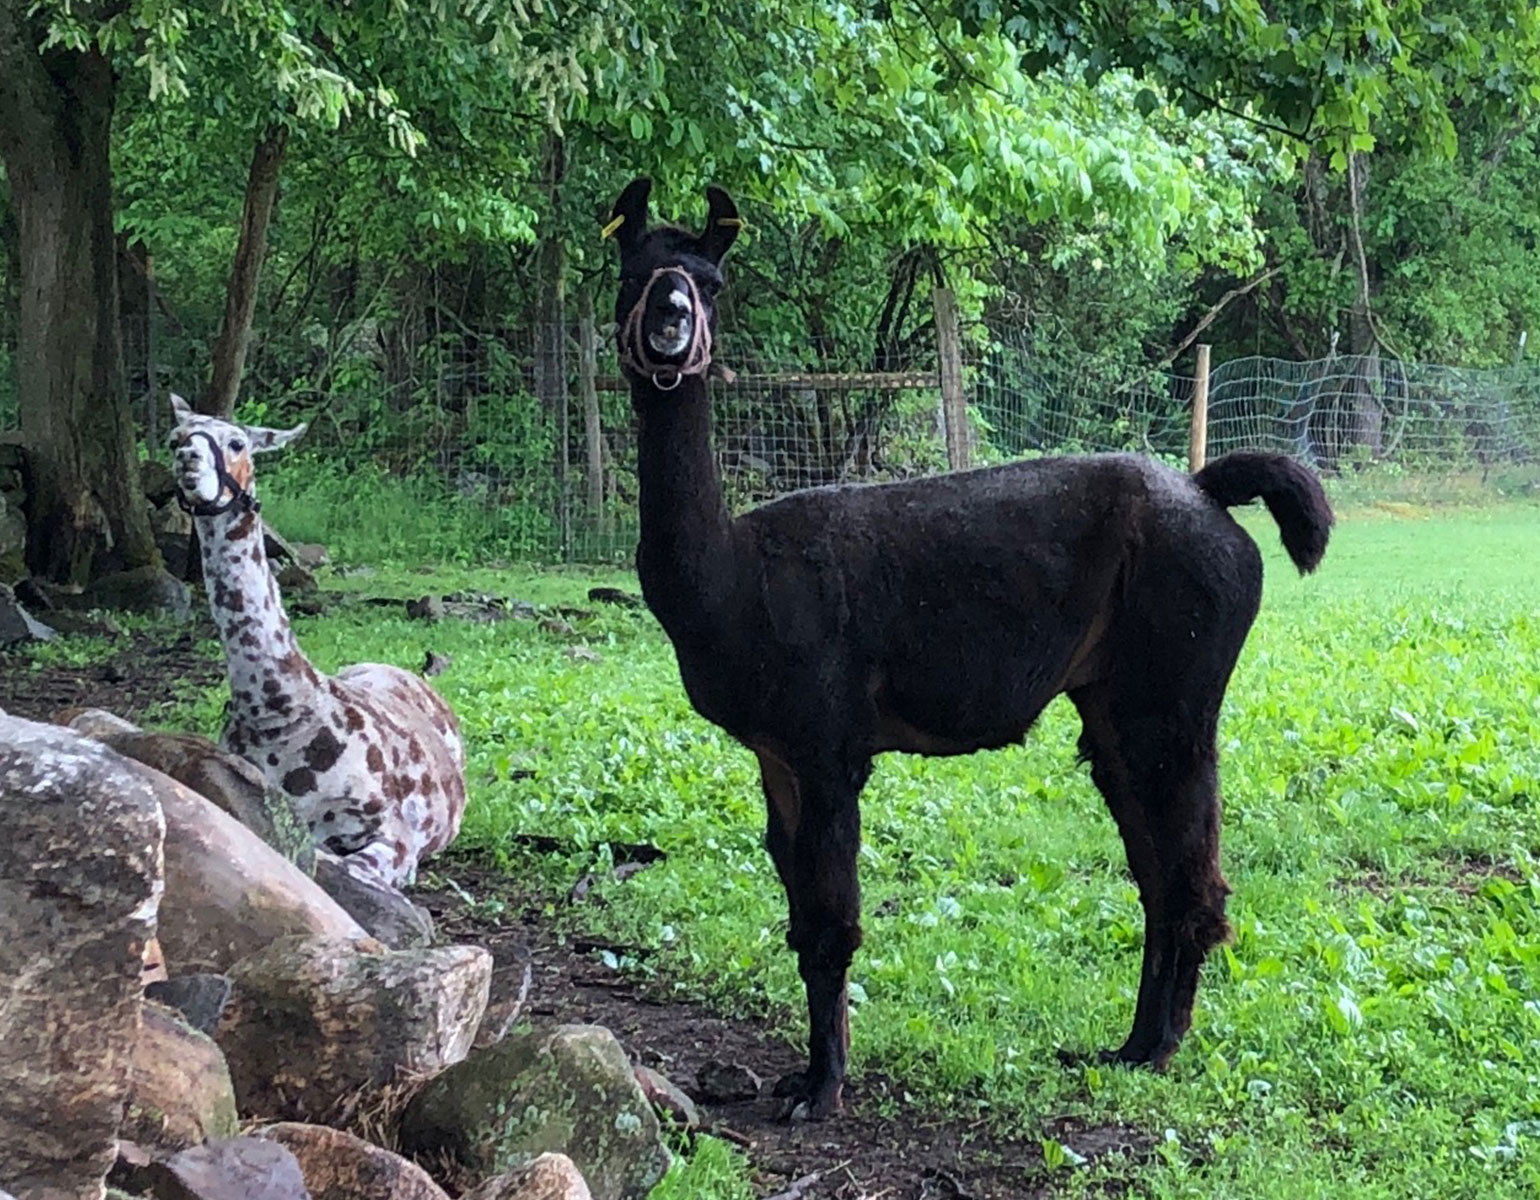 For years, Rocky and Marley have participated in research aimed at harnessing the wonders of their immune system. The llamas live in pastures in rural Massachusetts. 